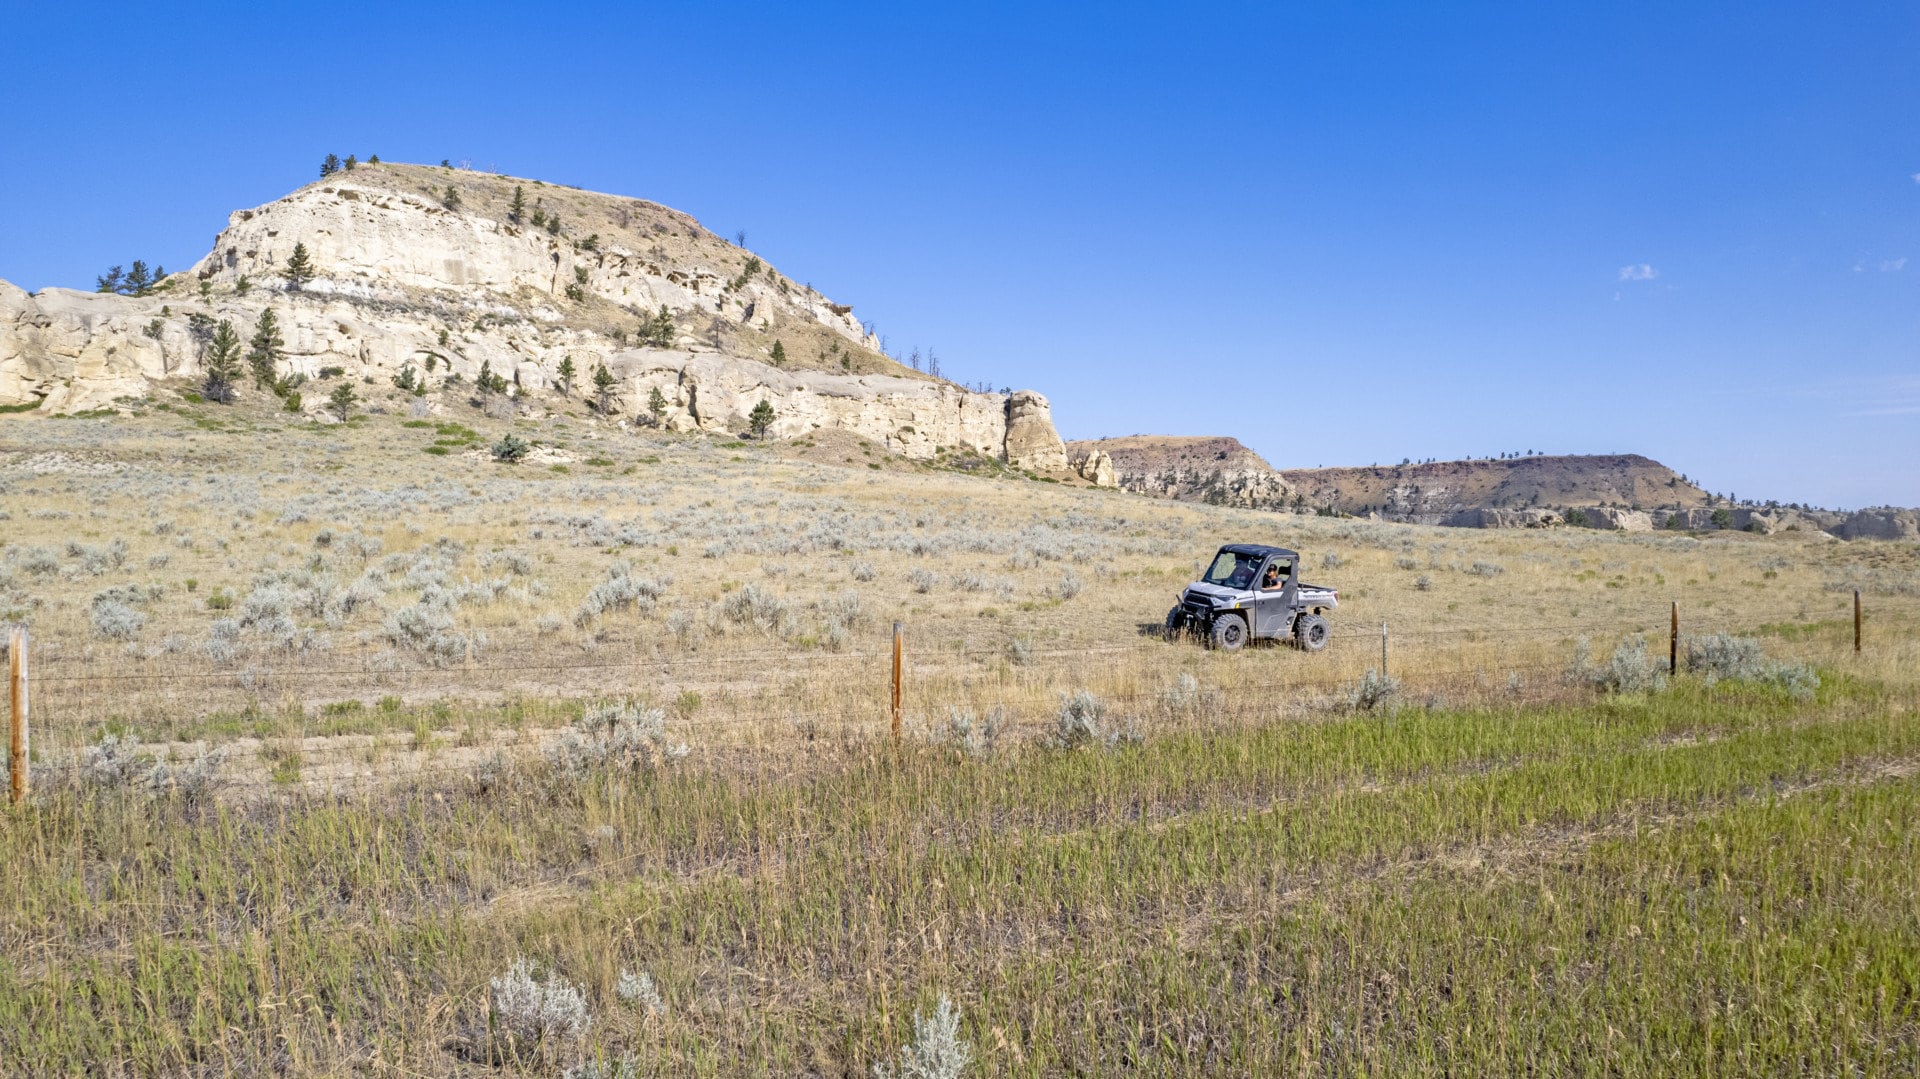 developed roads across property and fenced pastures montana golder ranch on rosebud creek